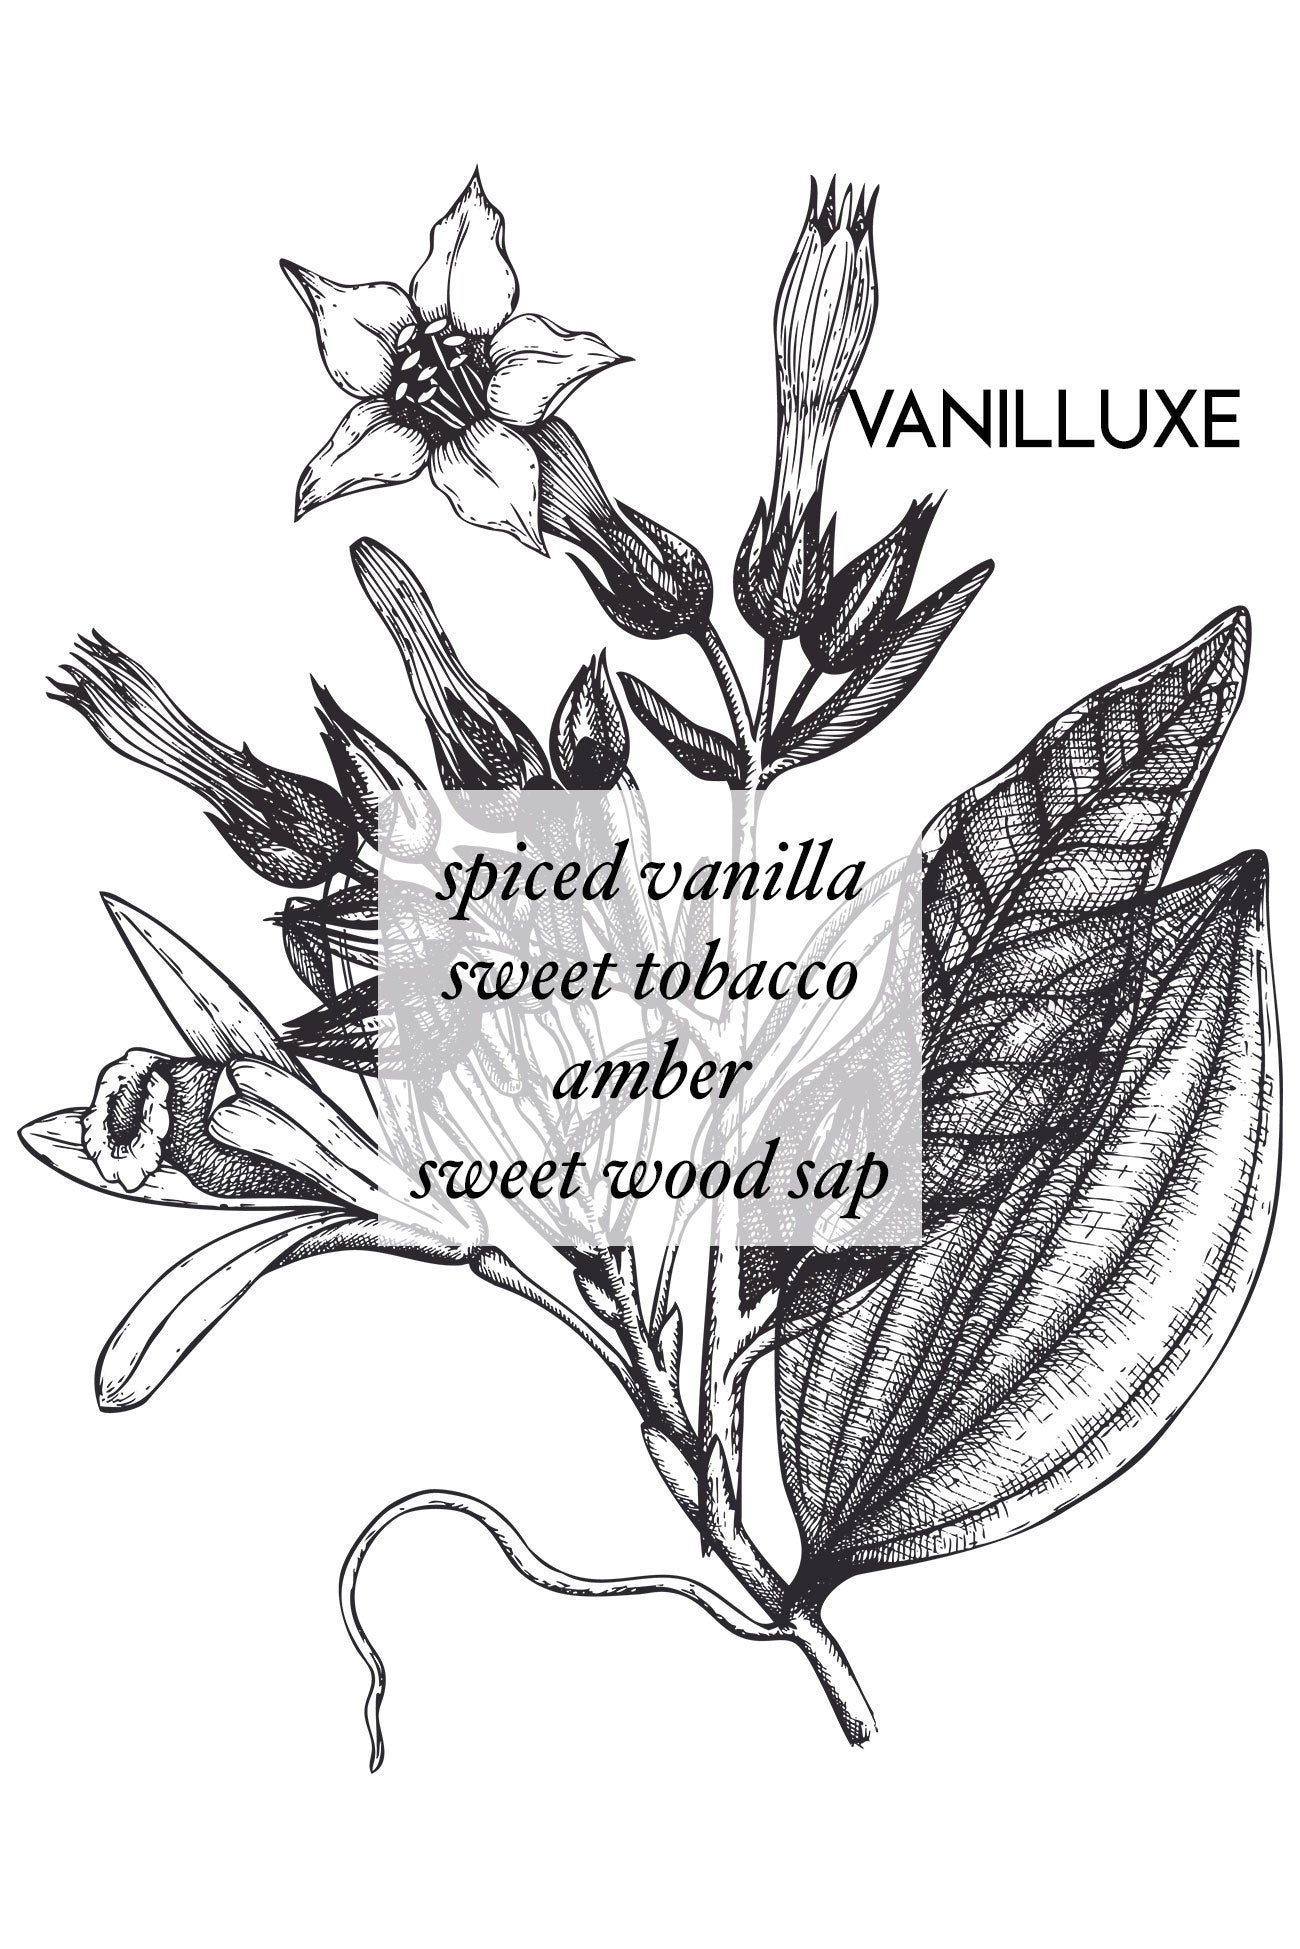 VANILLUXE - Vintage Version - AEMBR - Clean Luxury Candles, Wax Melts & Laundry Care